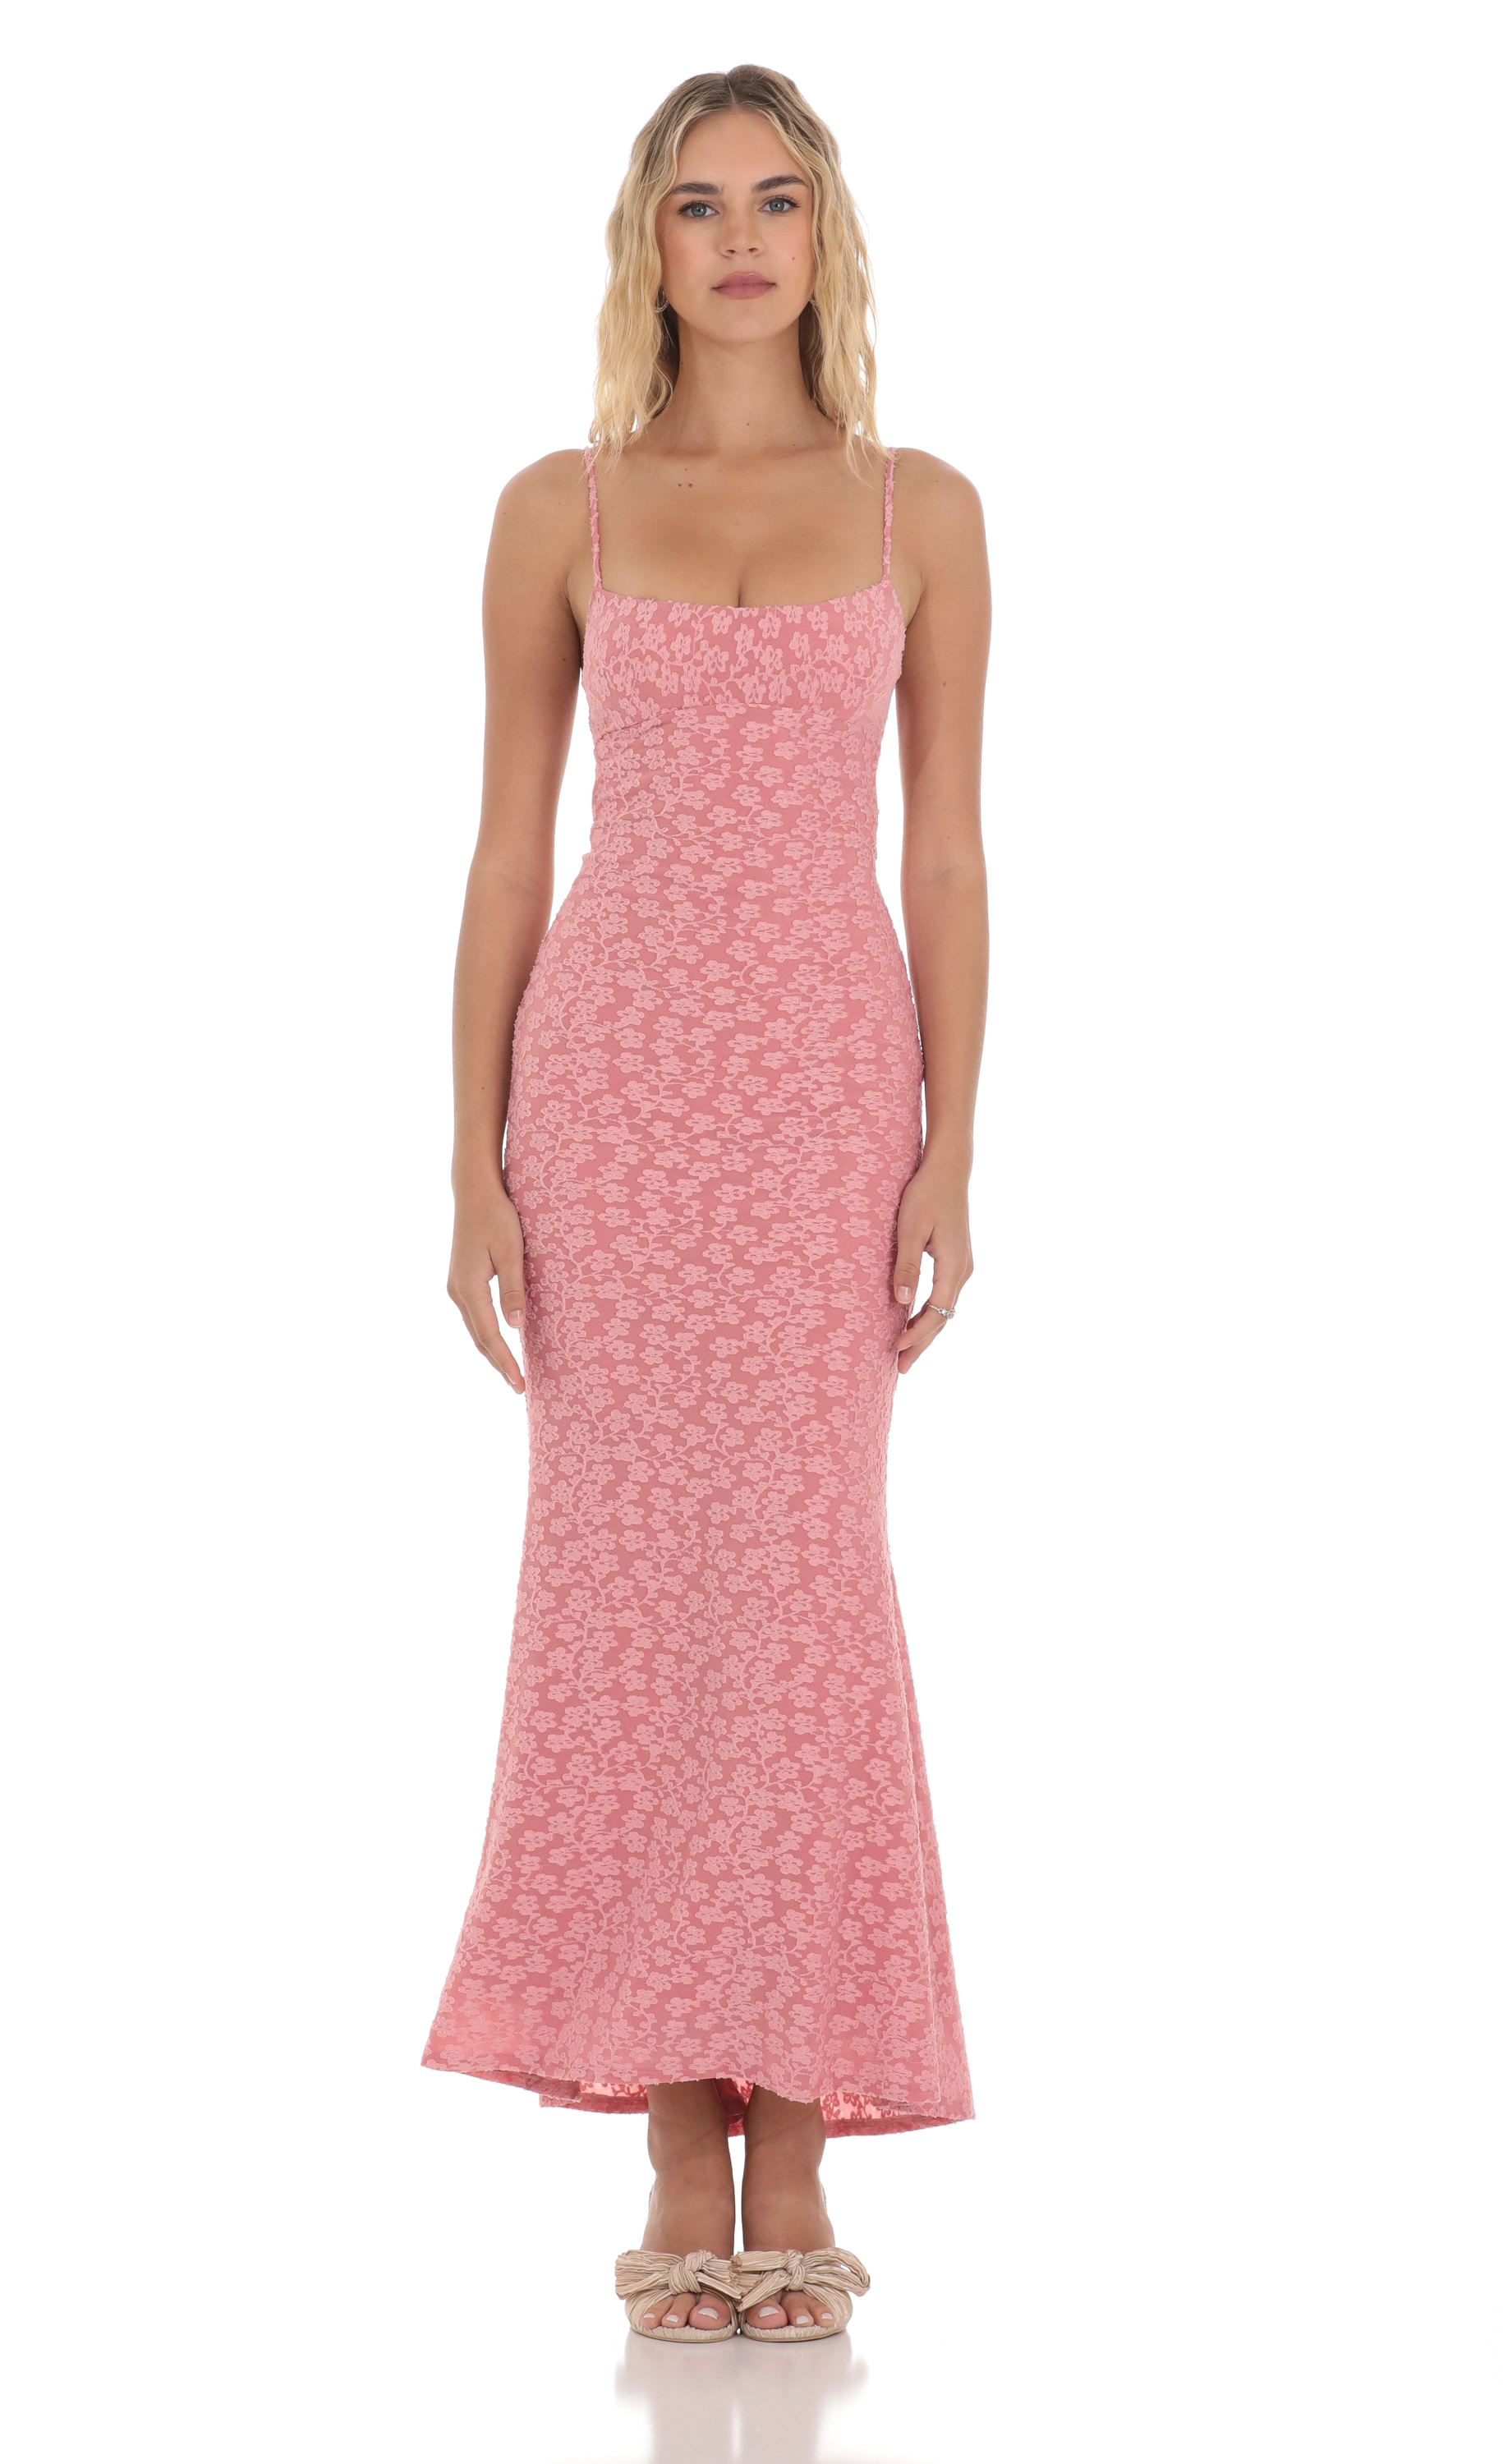 Textured Floral Maxi Dress in Pink